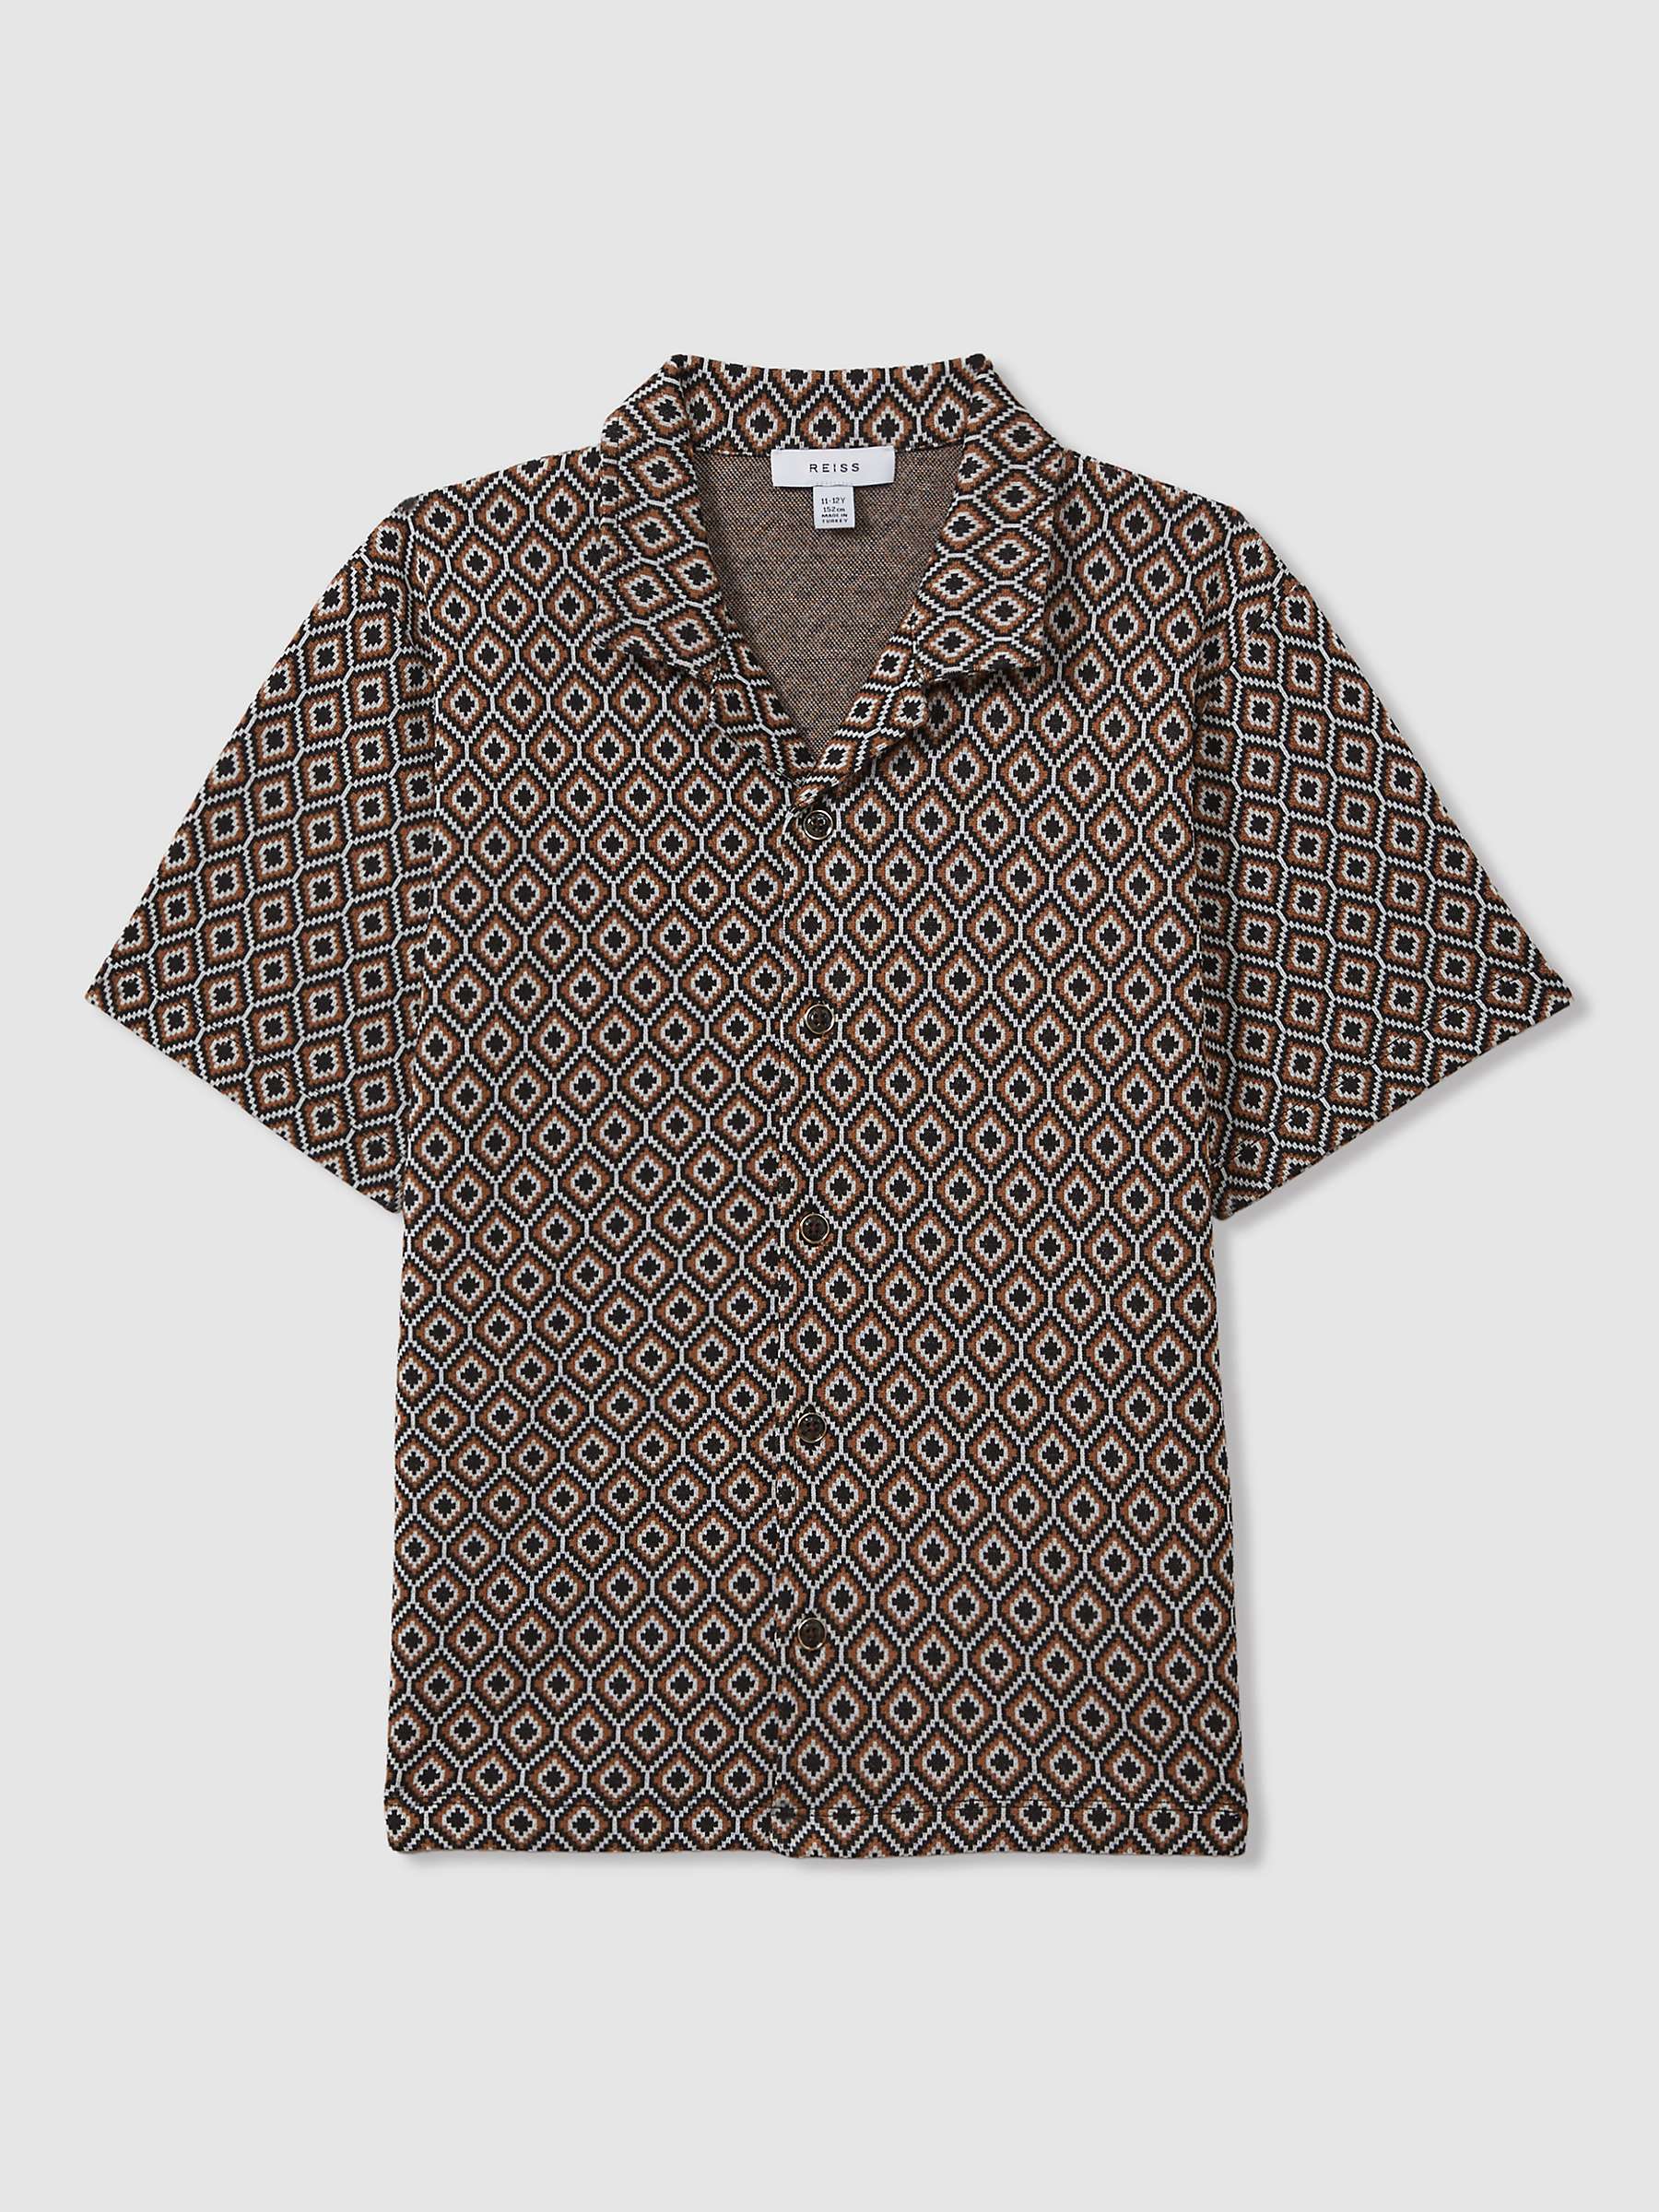 Buy Reiss Kids' Grove Abstract Print Shirt, Tobacco/Multi Online at johnlewis.com